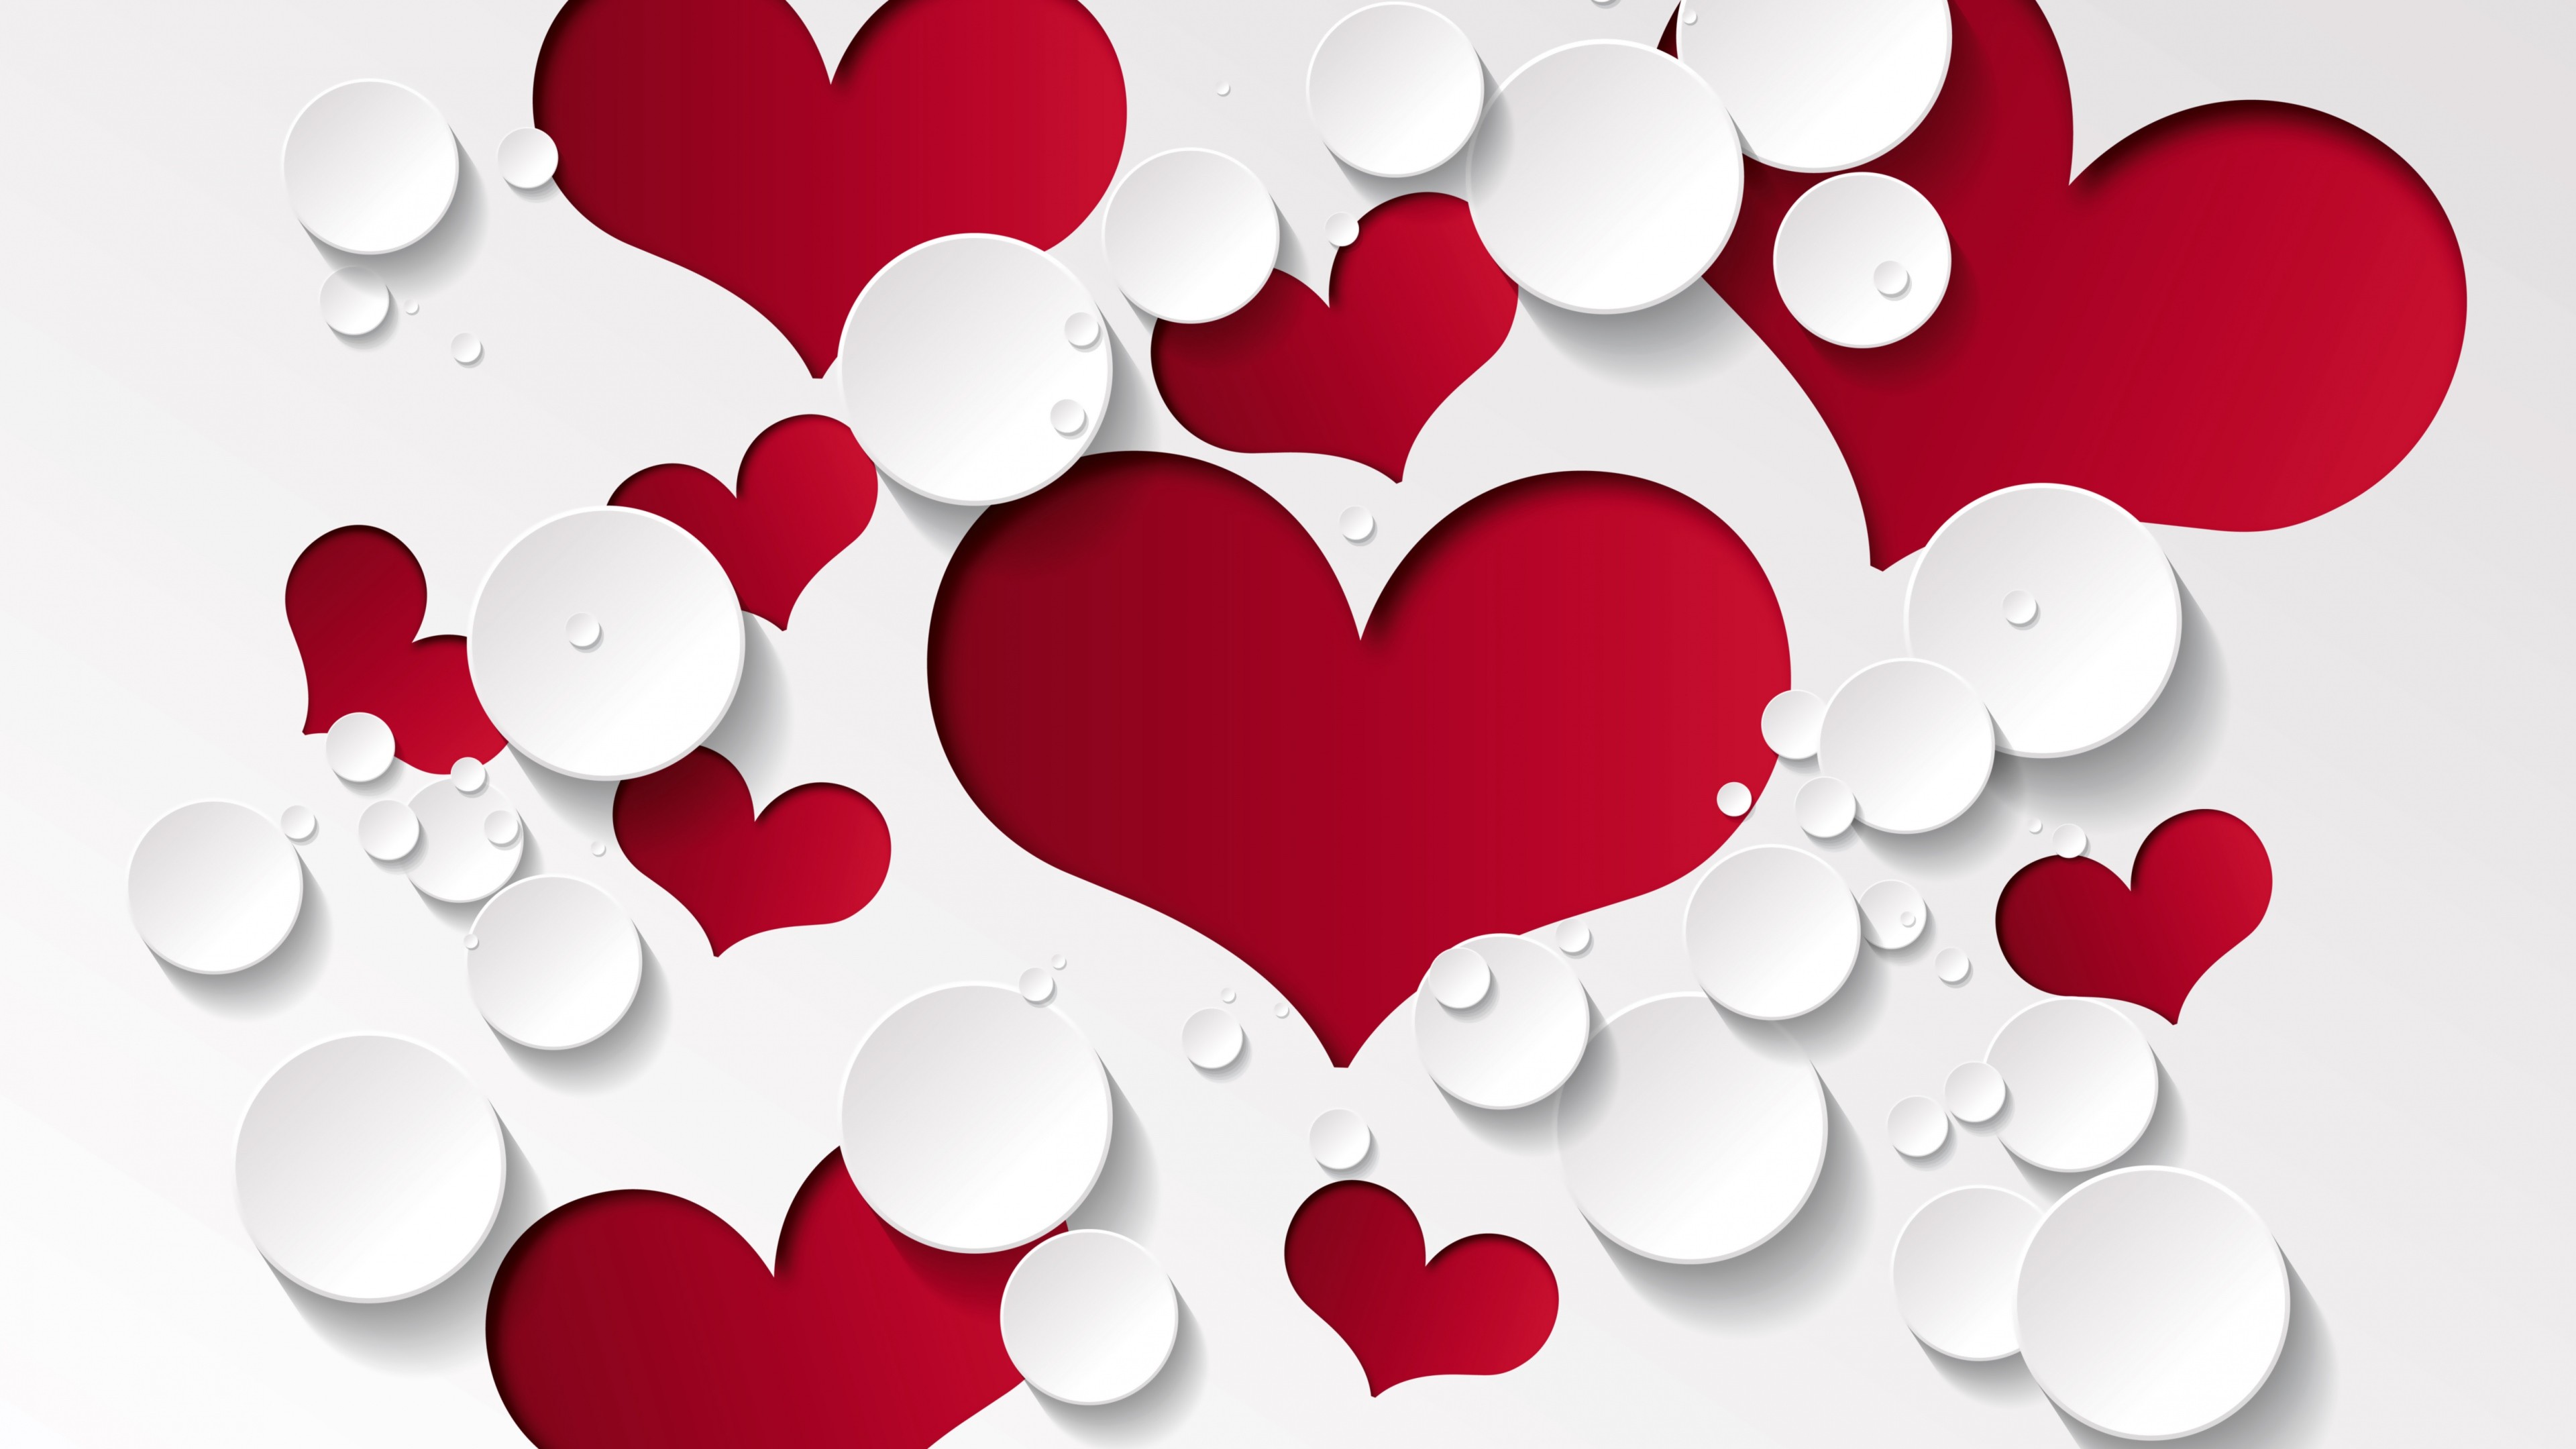 3840x2160 Heart Background Wallpapers WIN10 THEMES - HD Wallpapers